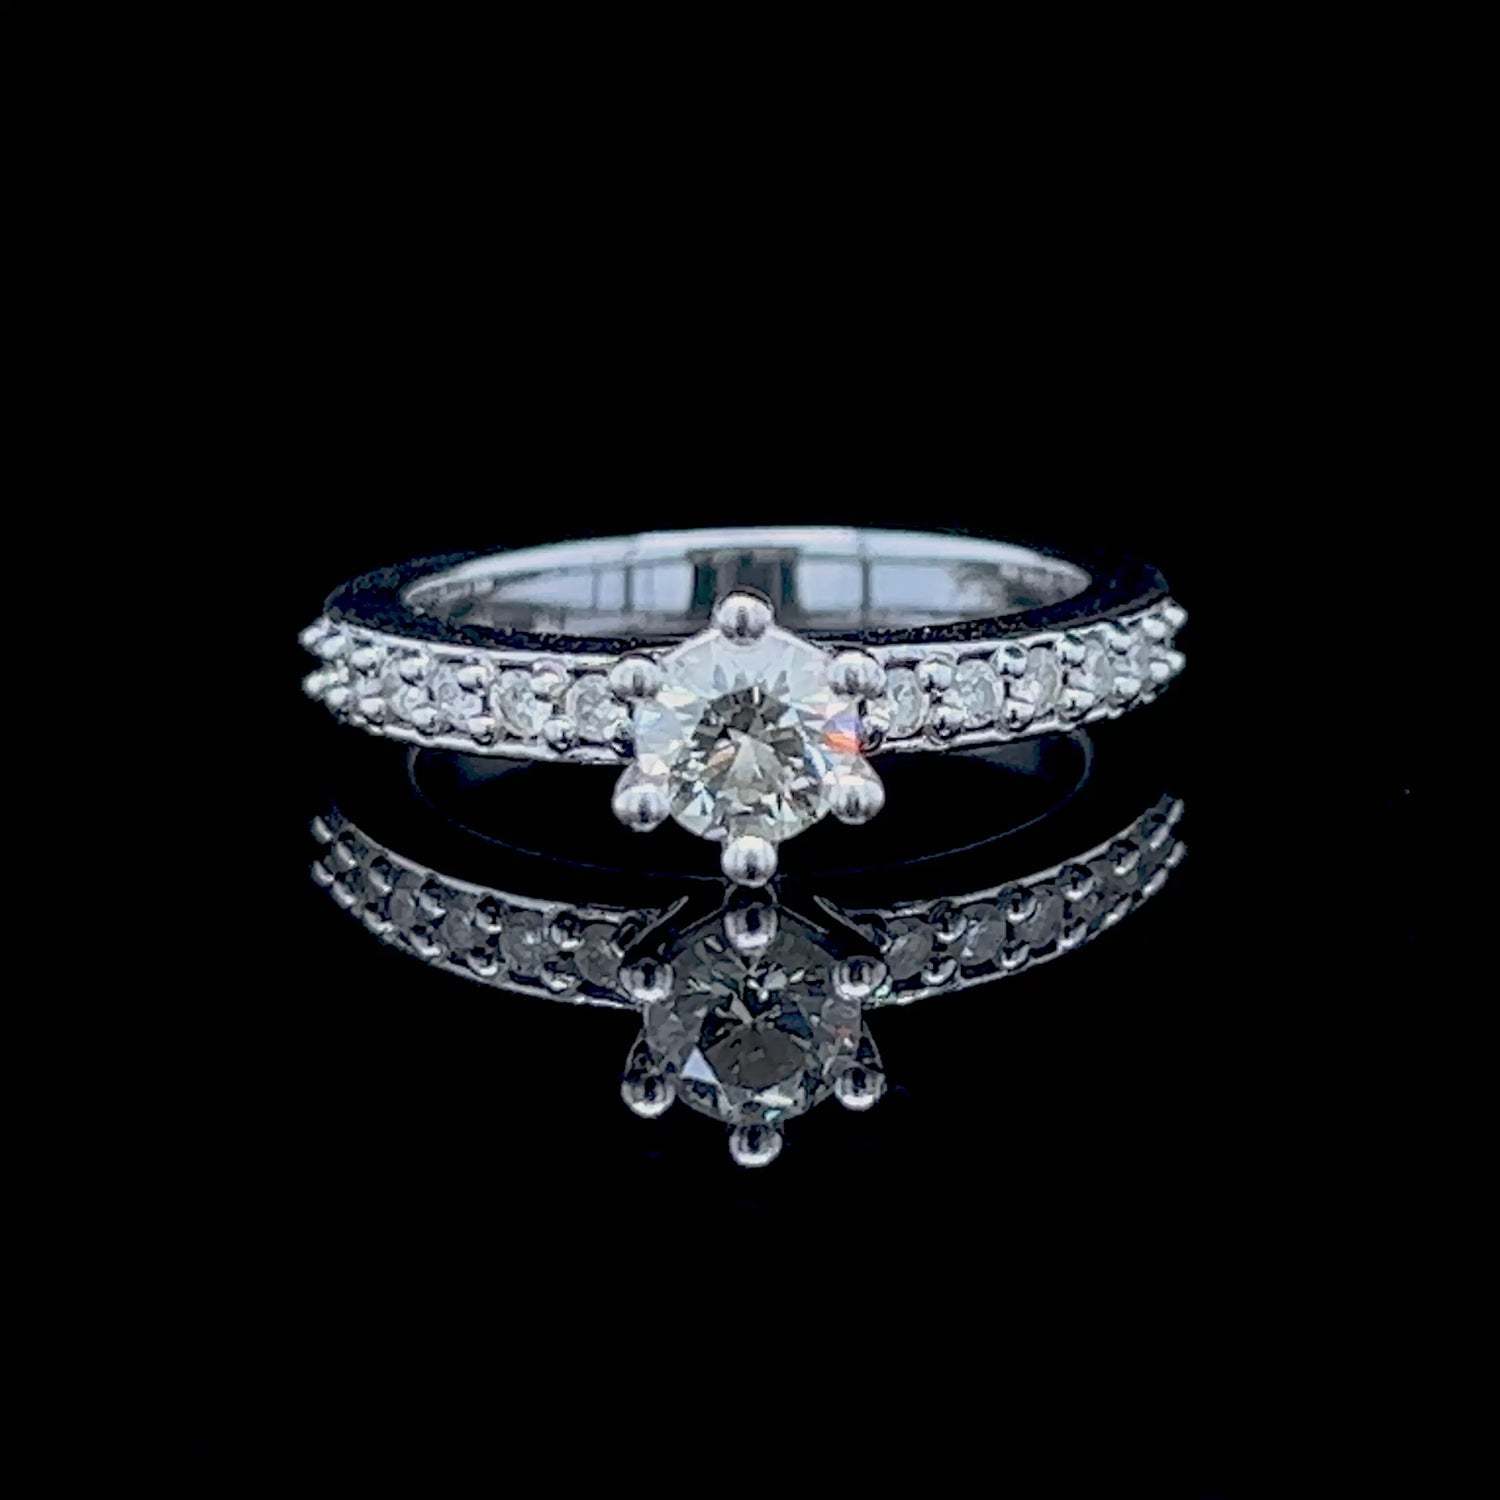 Cost-Effective 0.70 CT Round Cut Diamond Engagement Ring in 14 KT White Gold